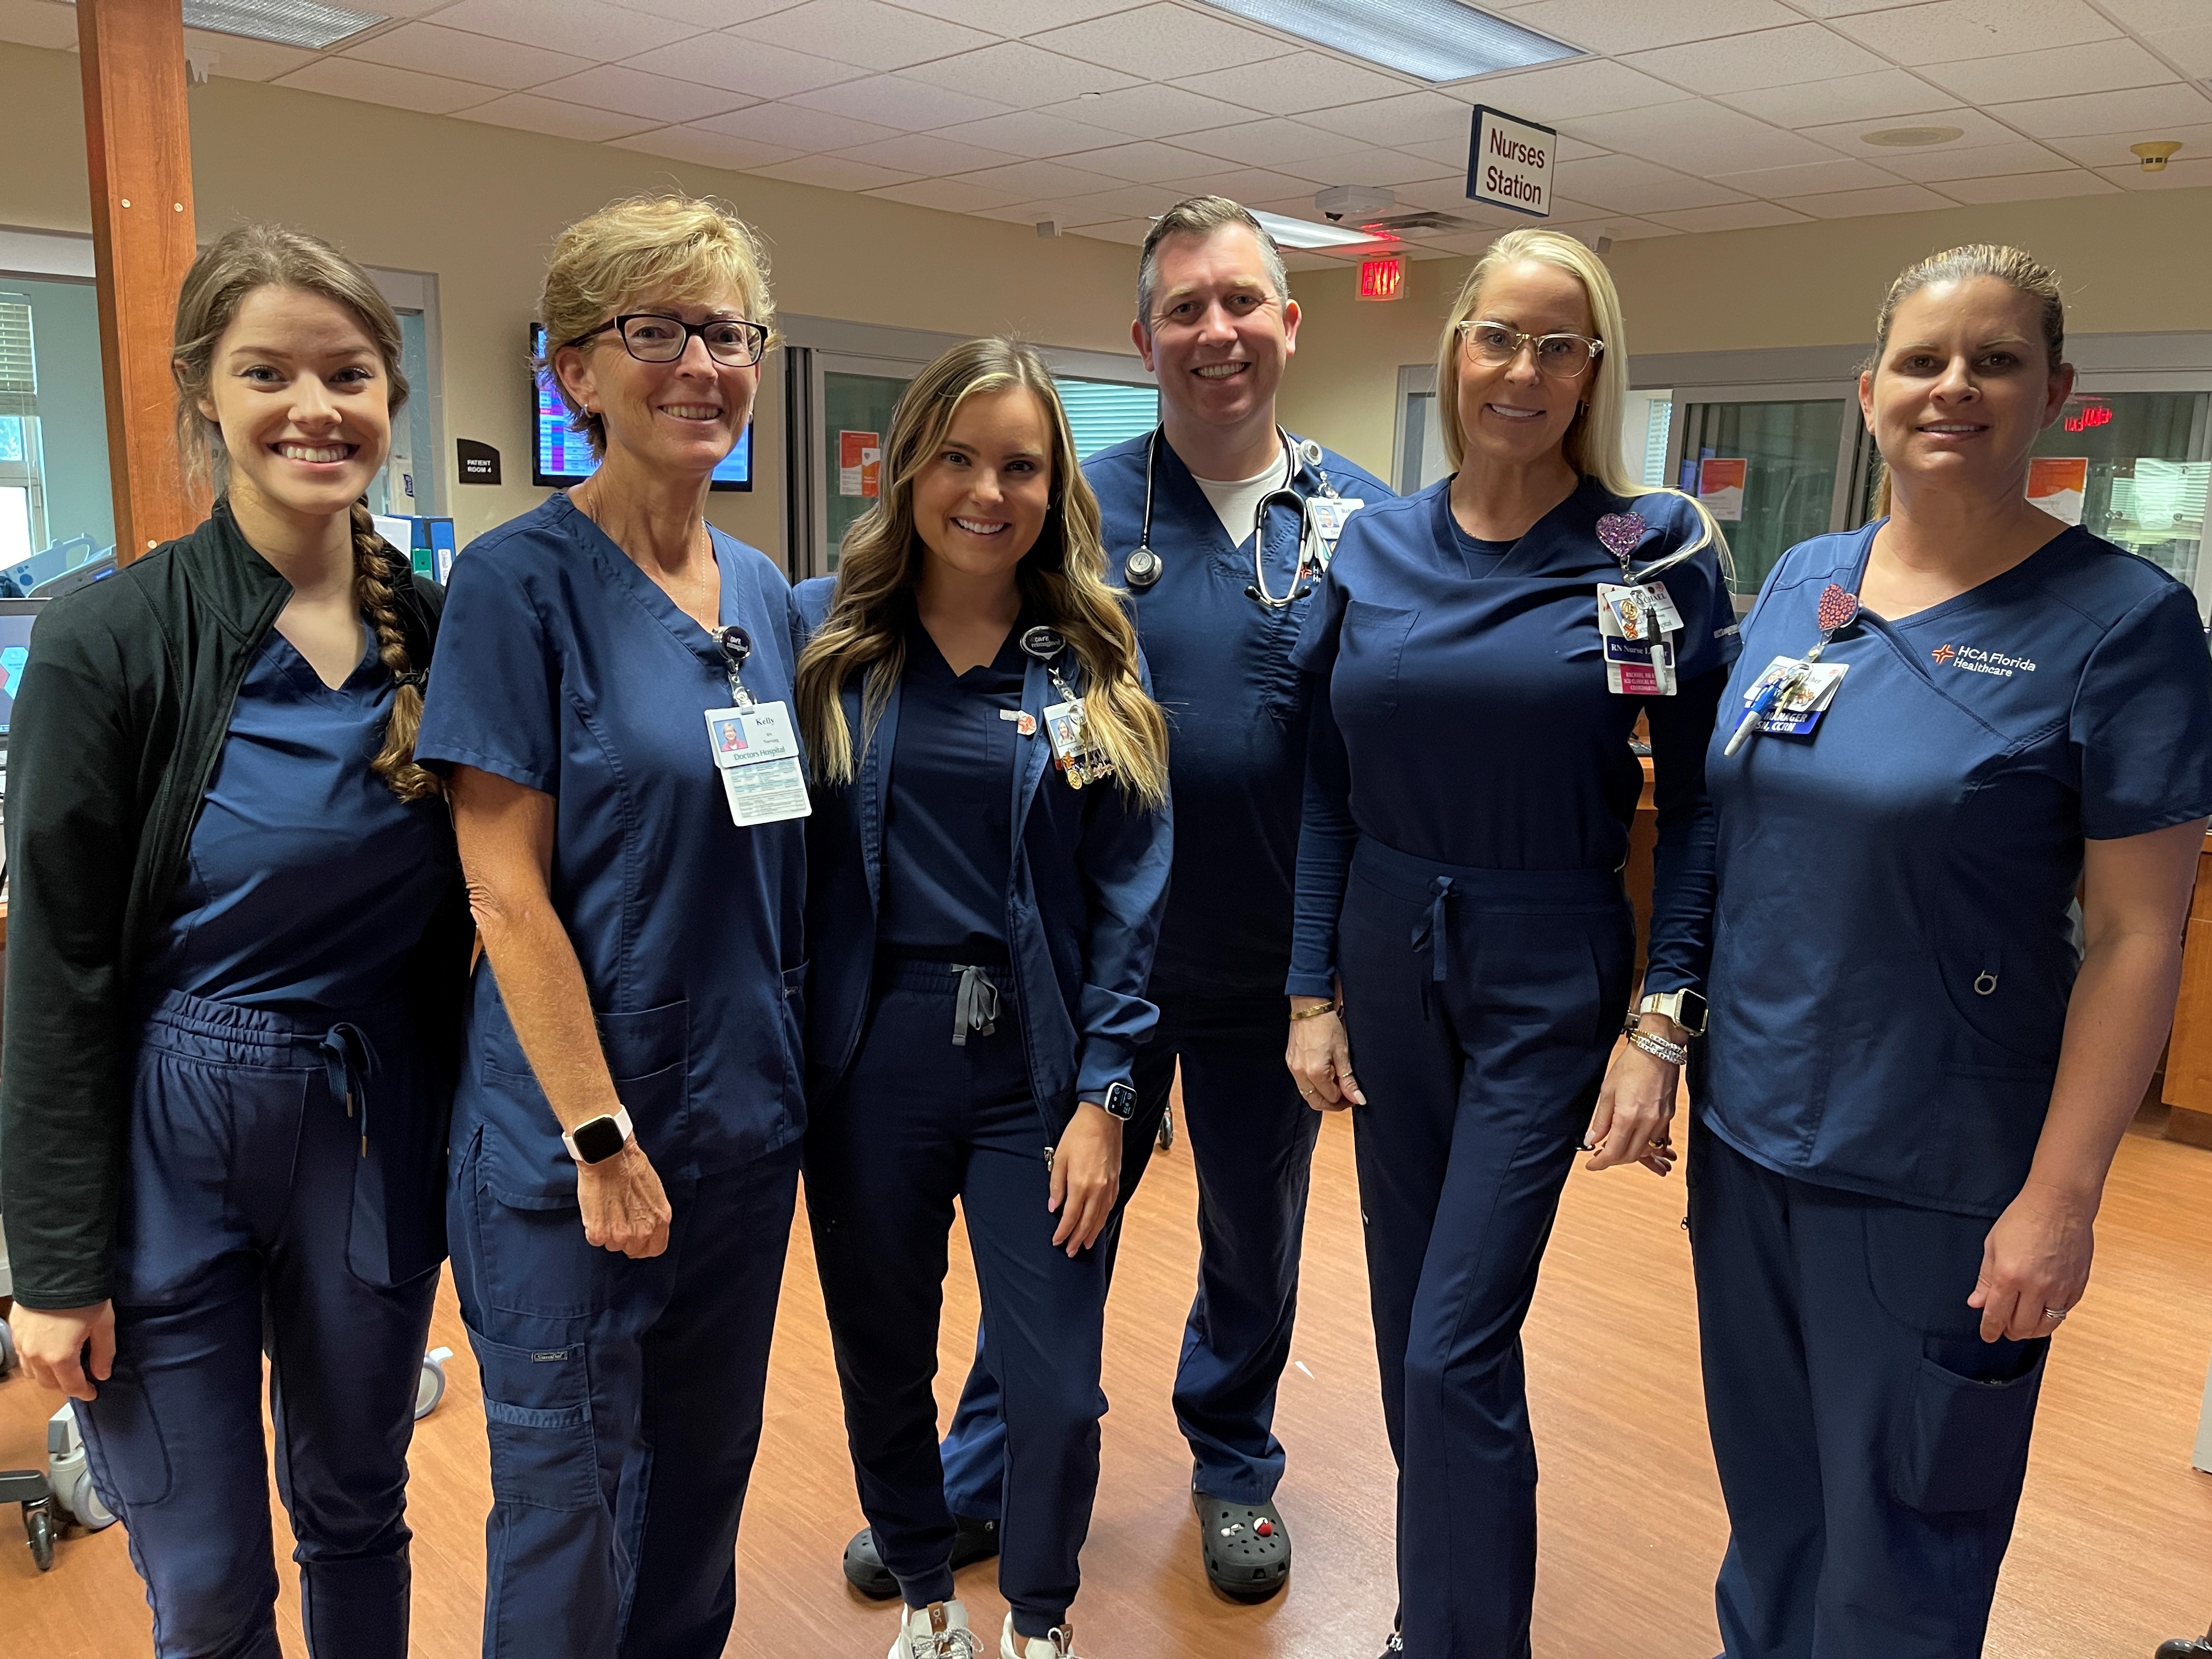 HCA Florida Raulerson Hospital - Registered Nurses Tess, Kathryn and Dee  are modeling the new uniform color for our Medical /Surgical nursing team!  These blue scrubs will unite our ICU, ER and